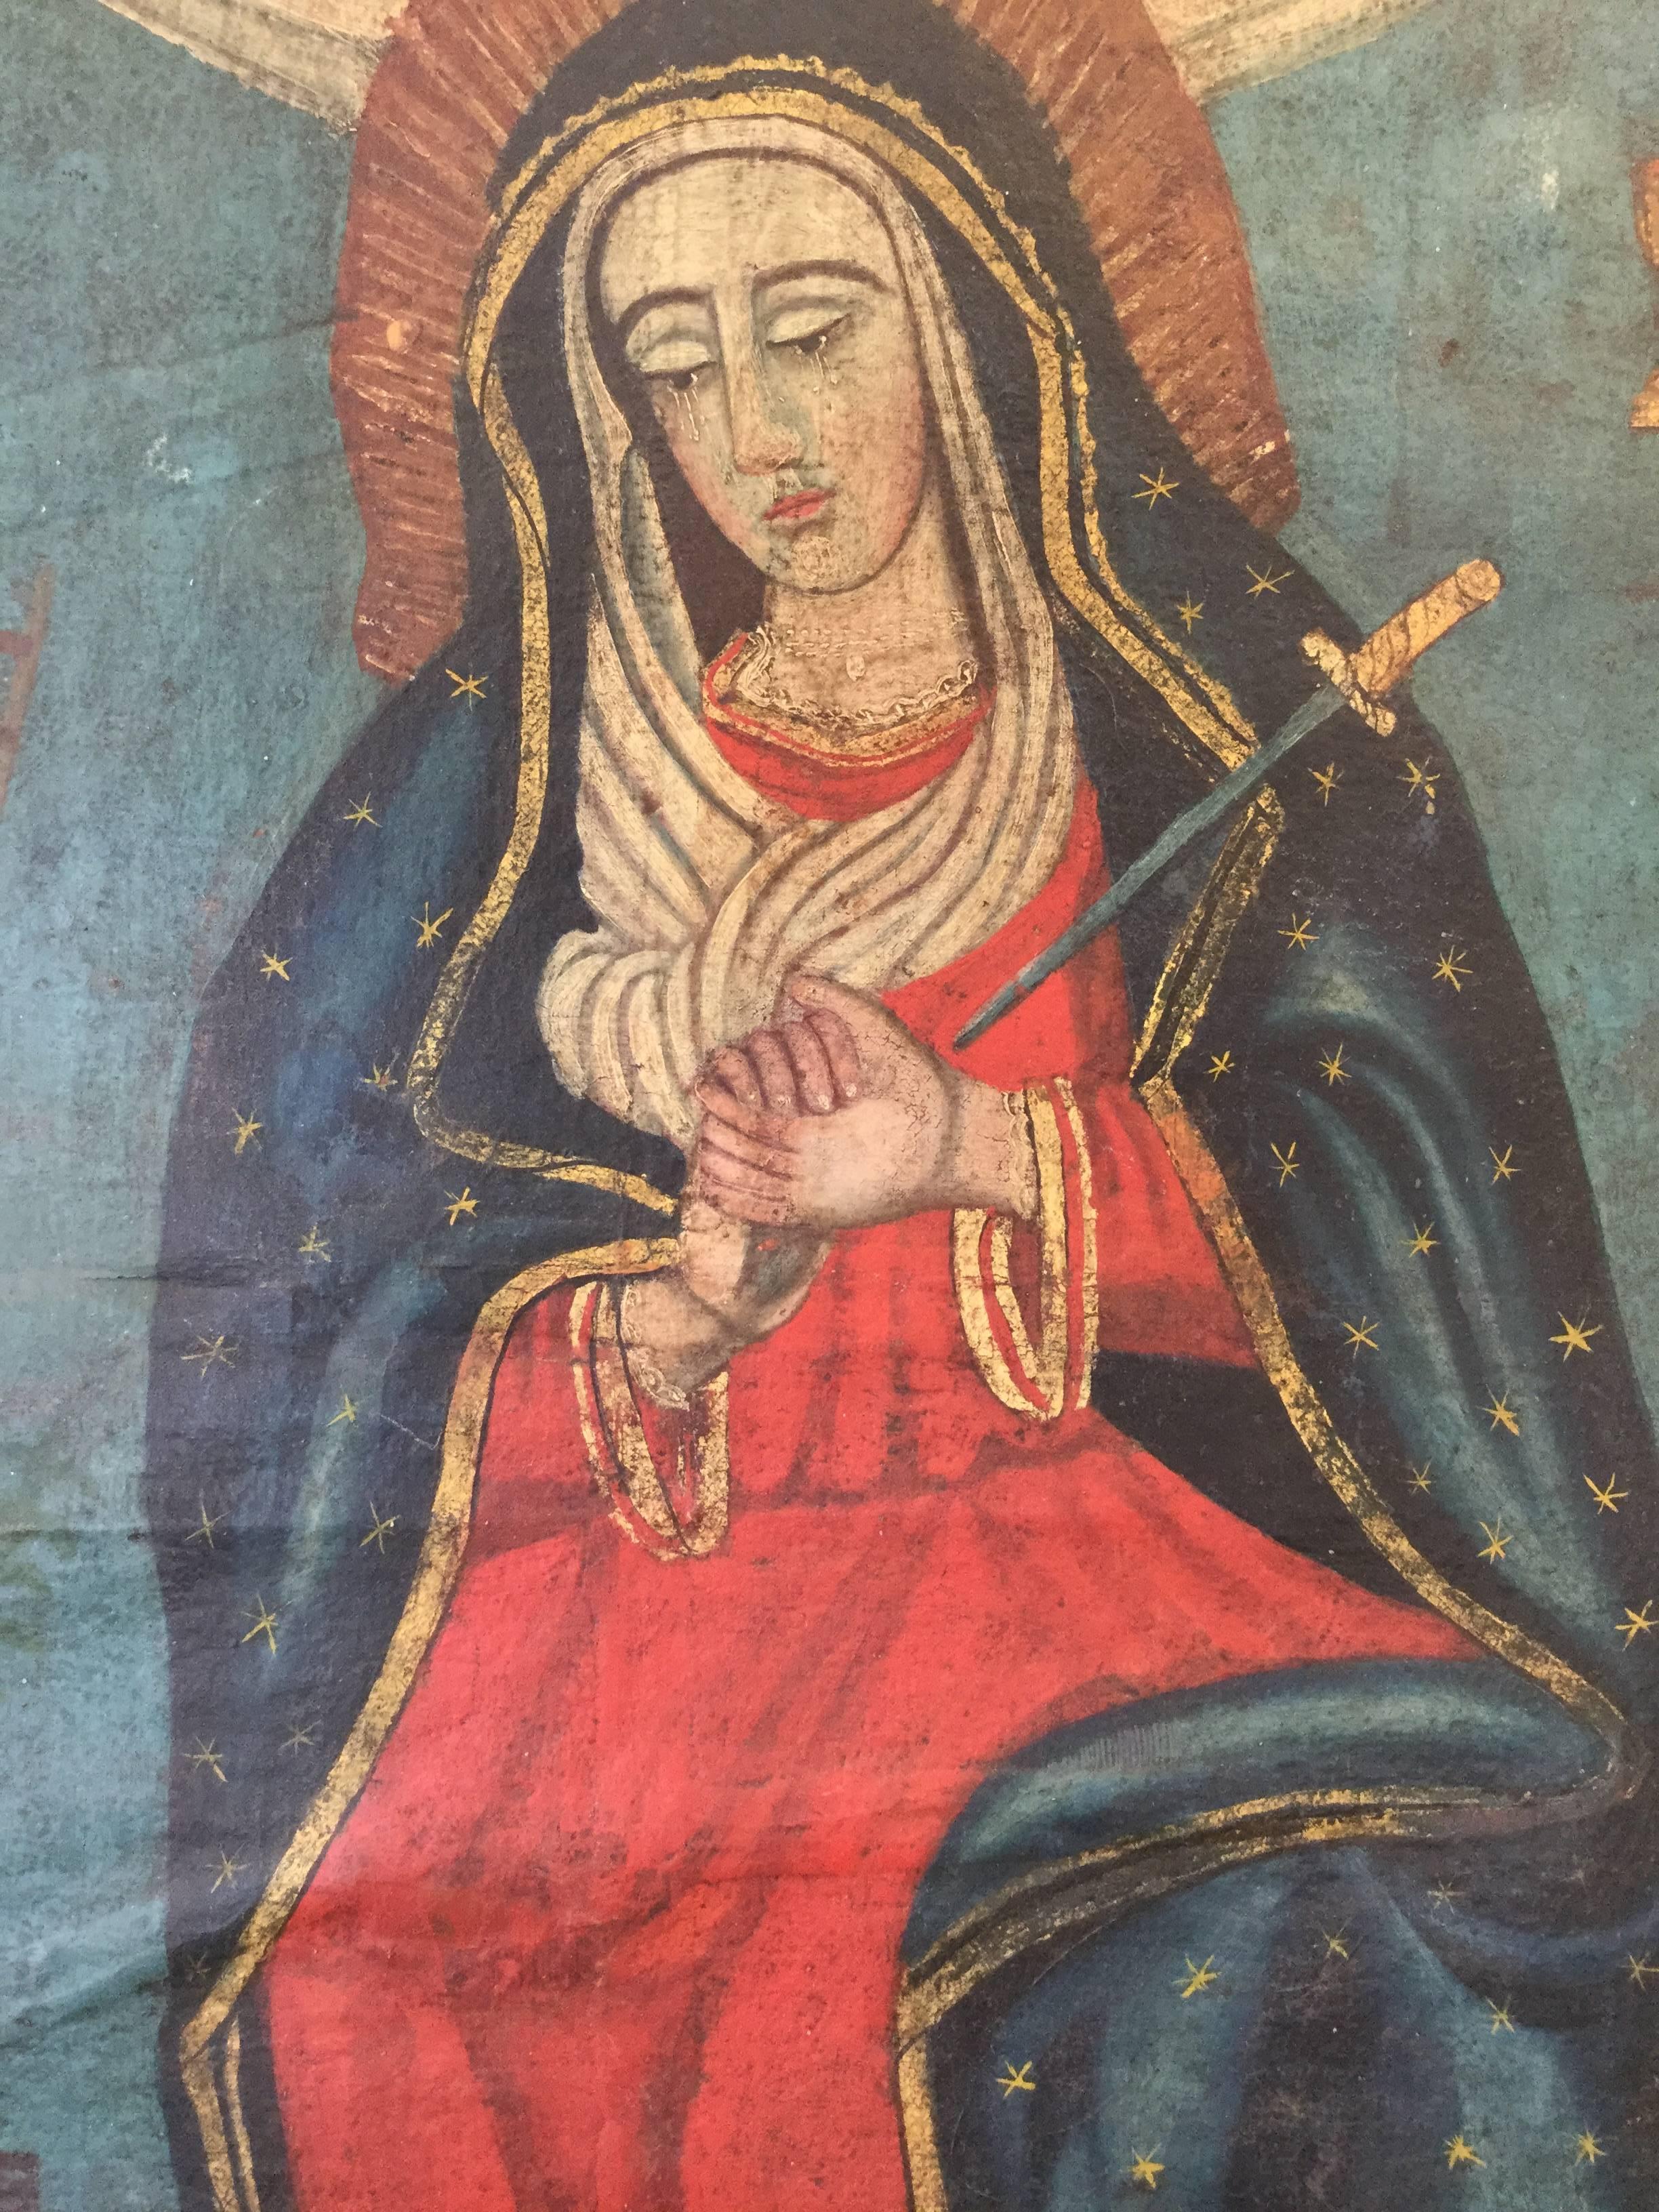 Beautiful fine Folk Art painting of the Madonna from Mexico, circa 1880. The colors, specifically the red and green contrast is an unusual and striking combination. Her face is and figure have the great quality that you see in the best Folk Art of